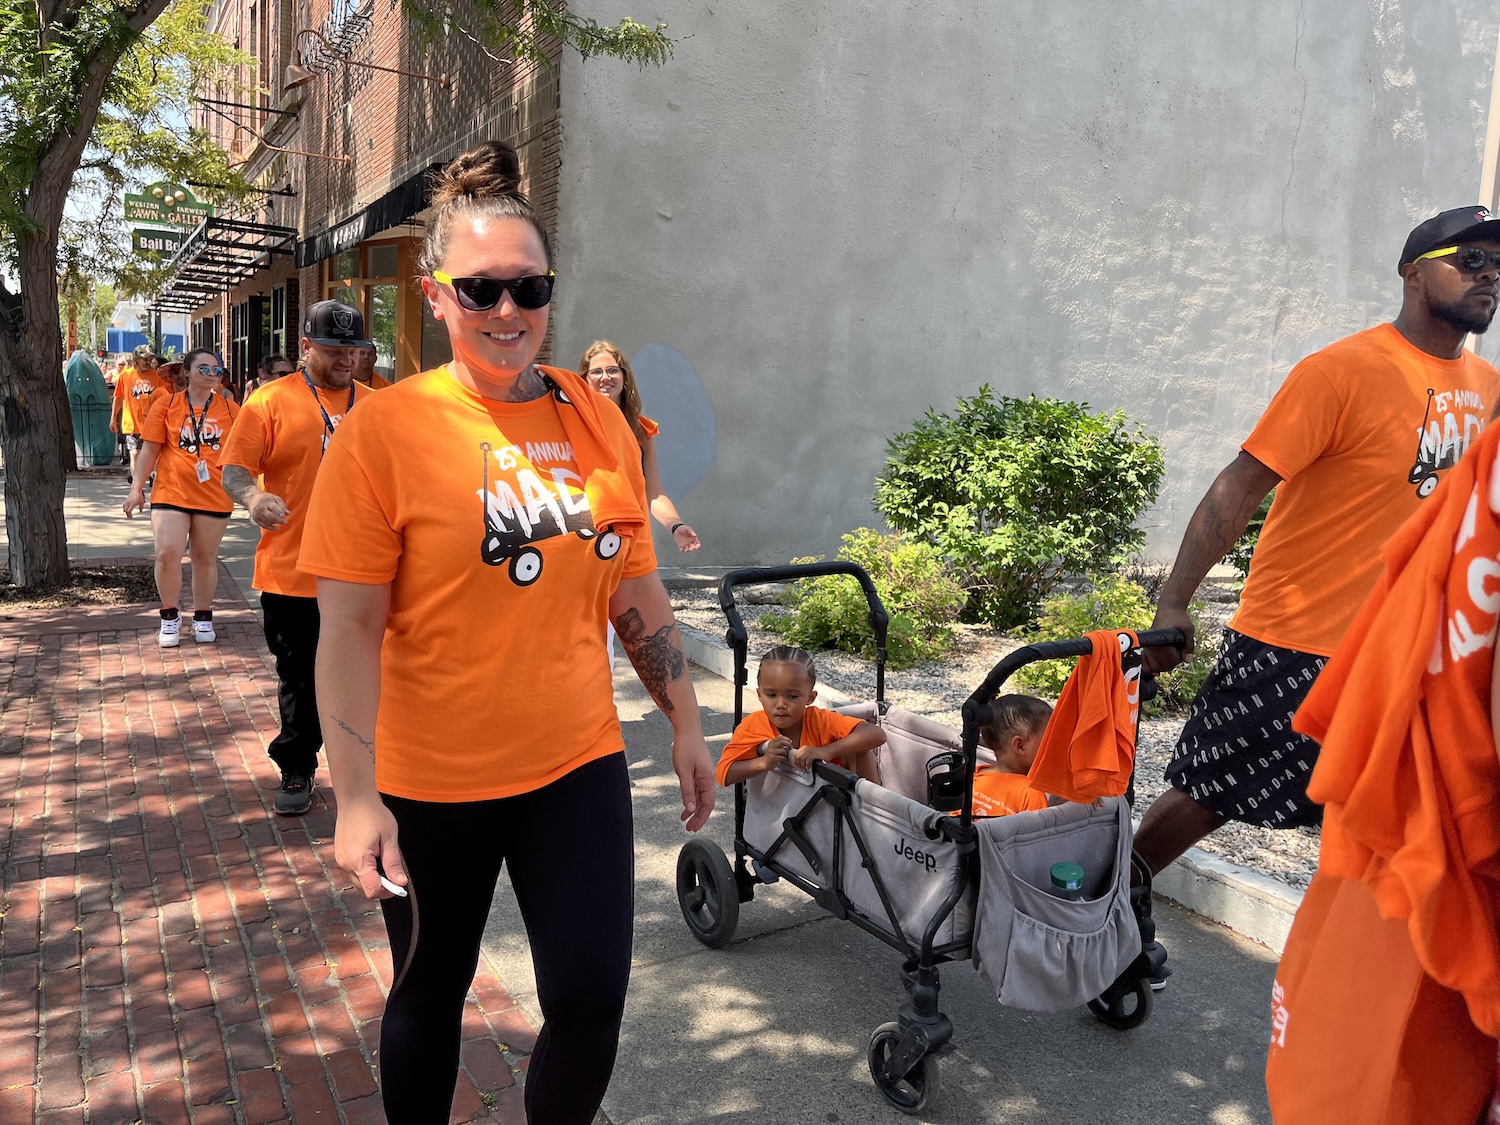 A group of people in orange T-shirts walk on a sidewalk during the Annual March. A woman pushes a double stroller with two children as they advocate against drugs and violence. Trees and a building are visible in the background, capturing a moment of unity within the USA community.